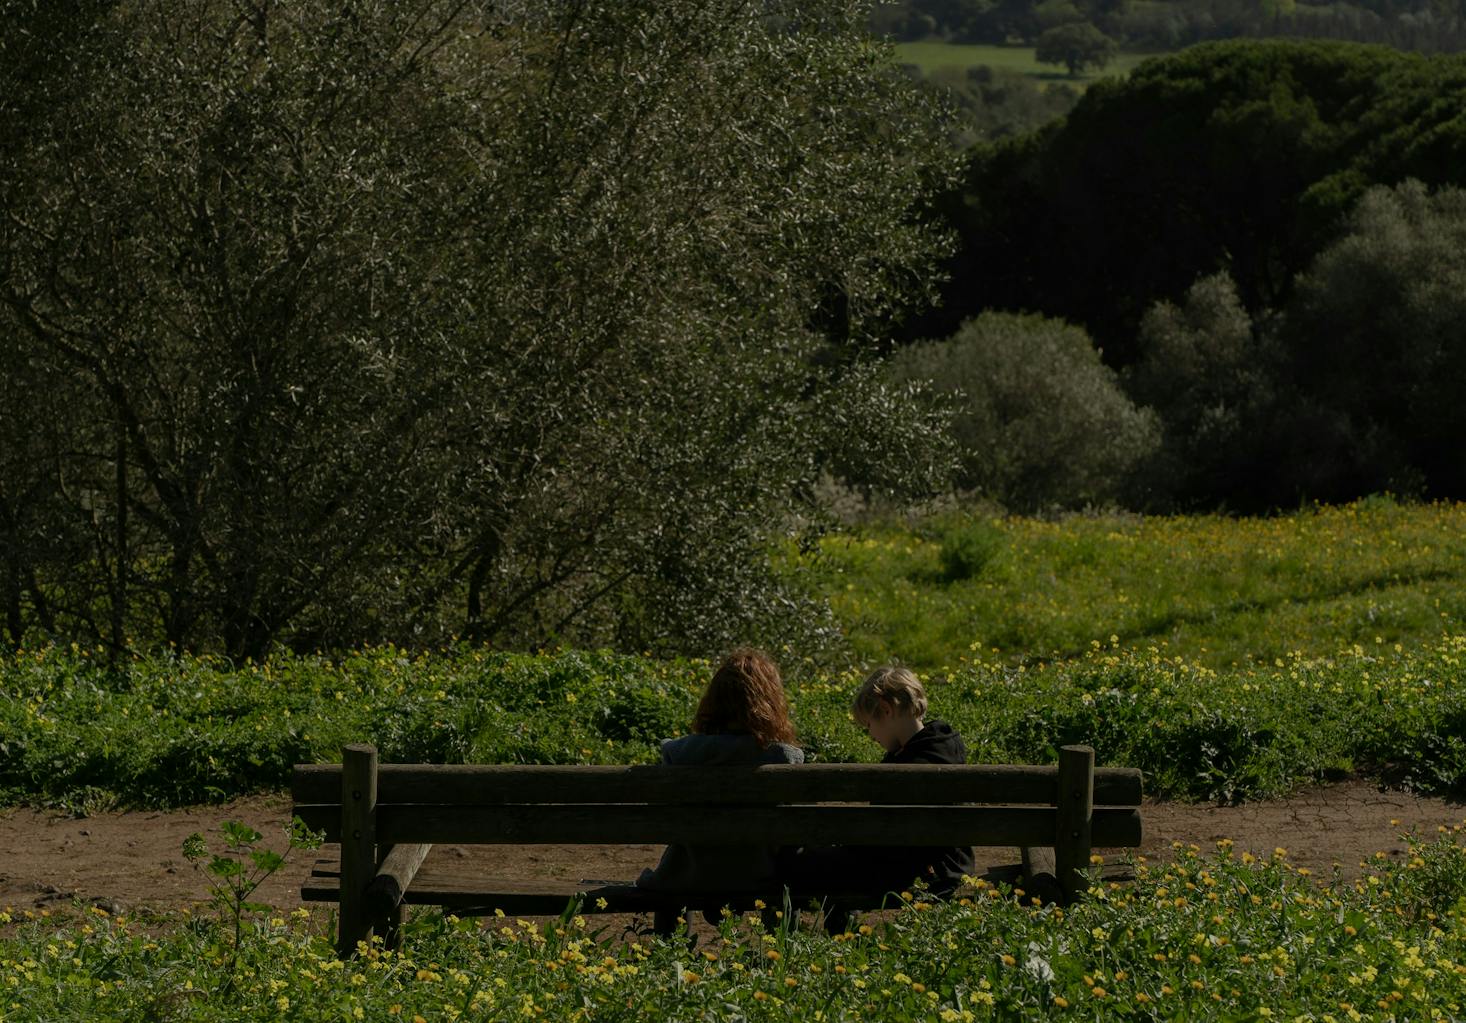 Two people on a park bench in a park with fields and flowers